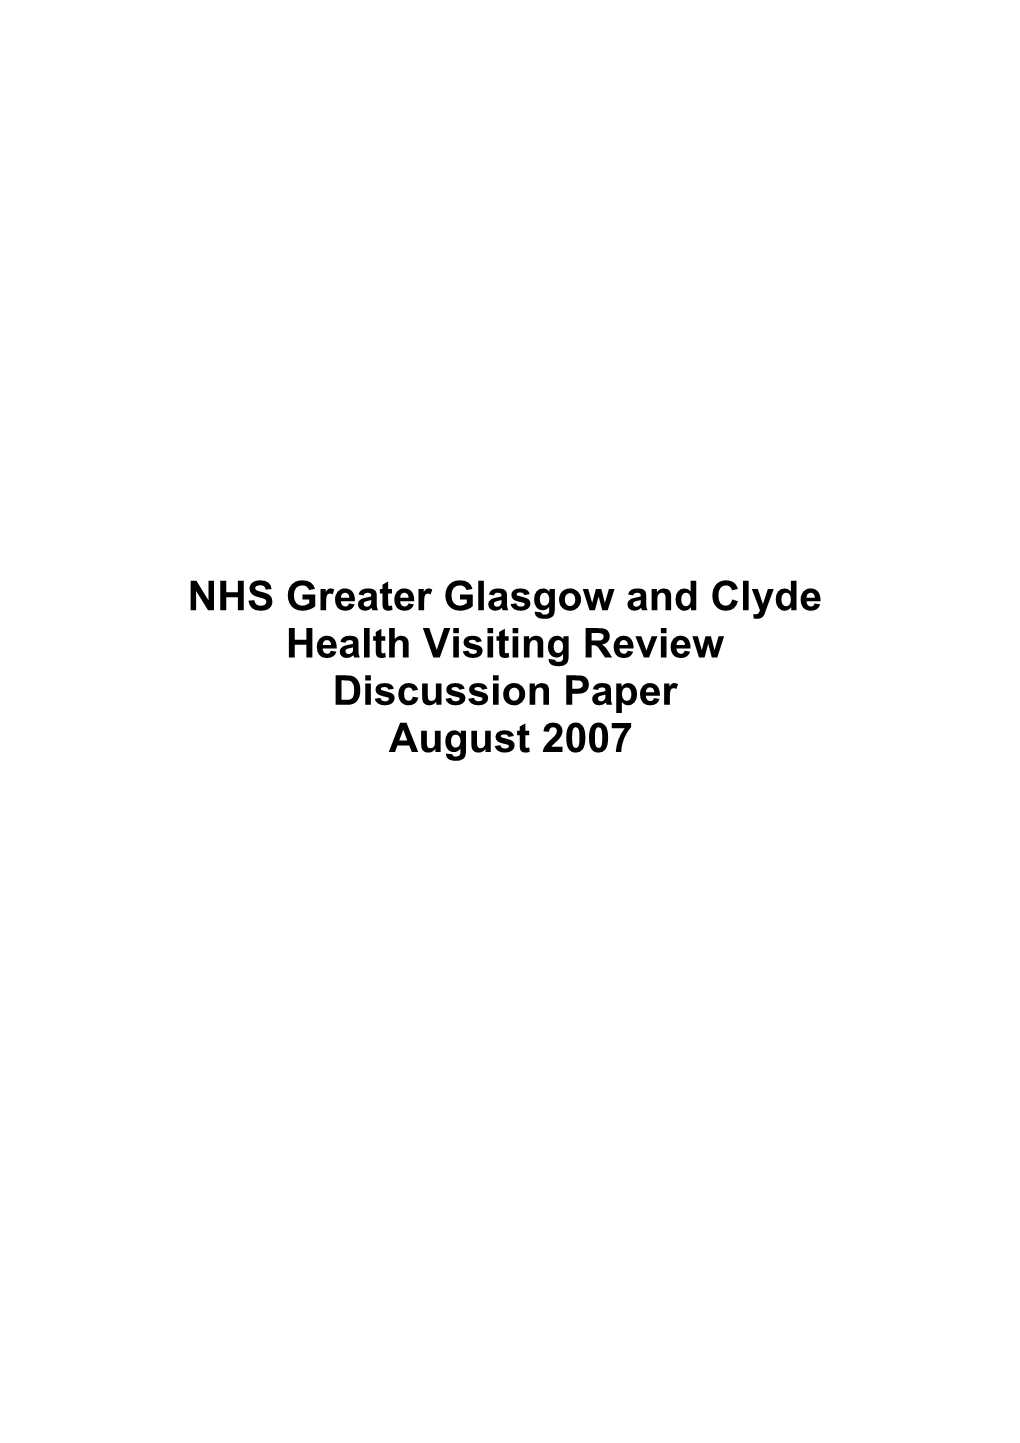 NHSGGC Health Visiting Review Discussion Paper July 2007